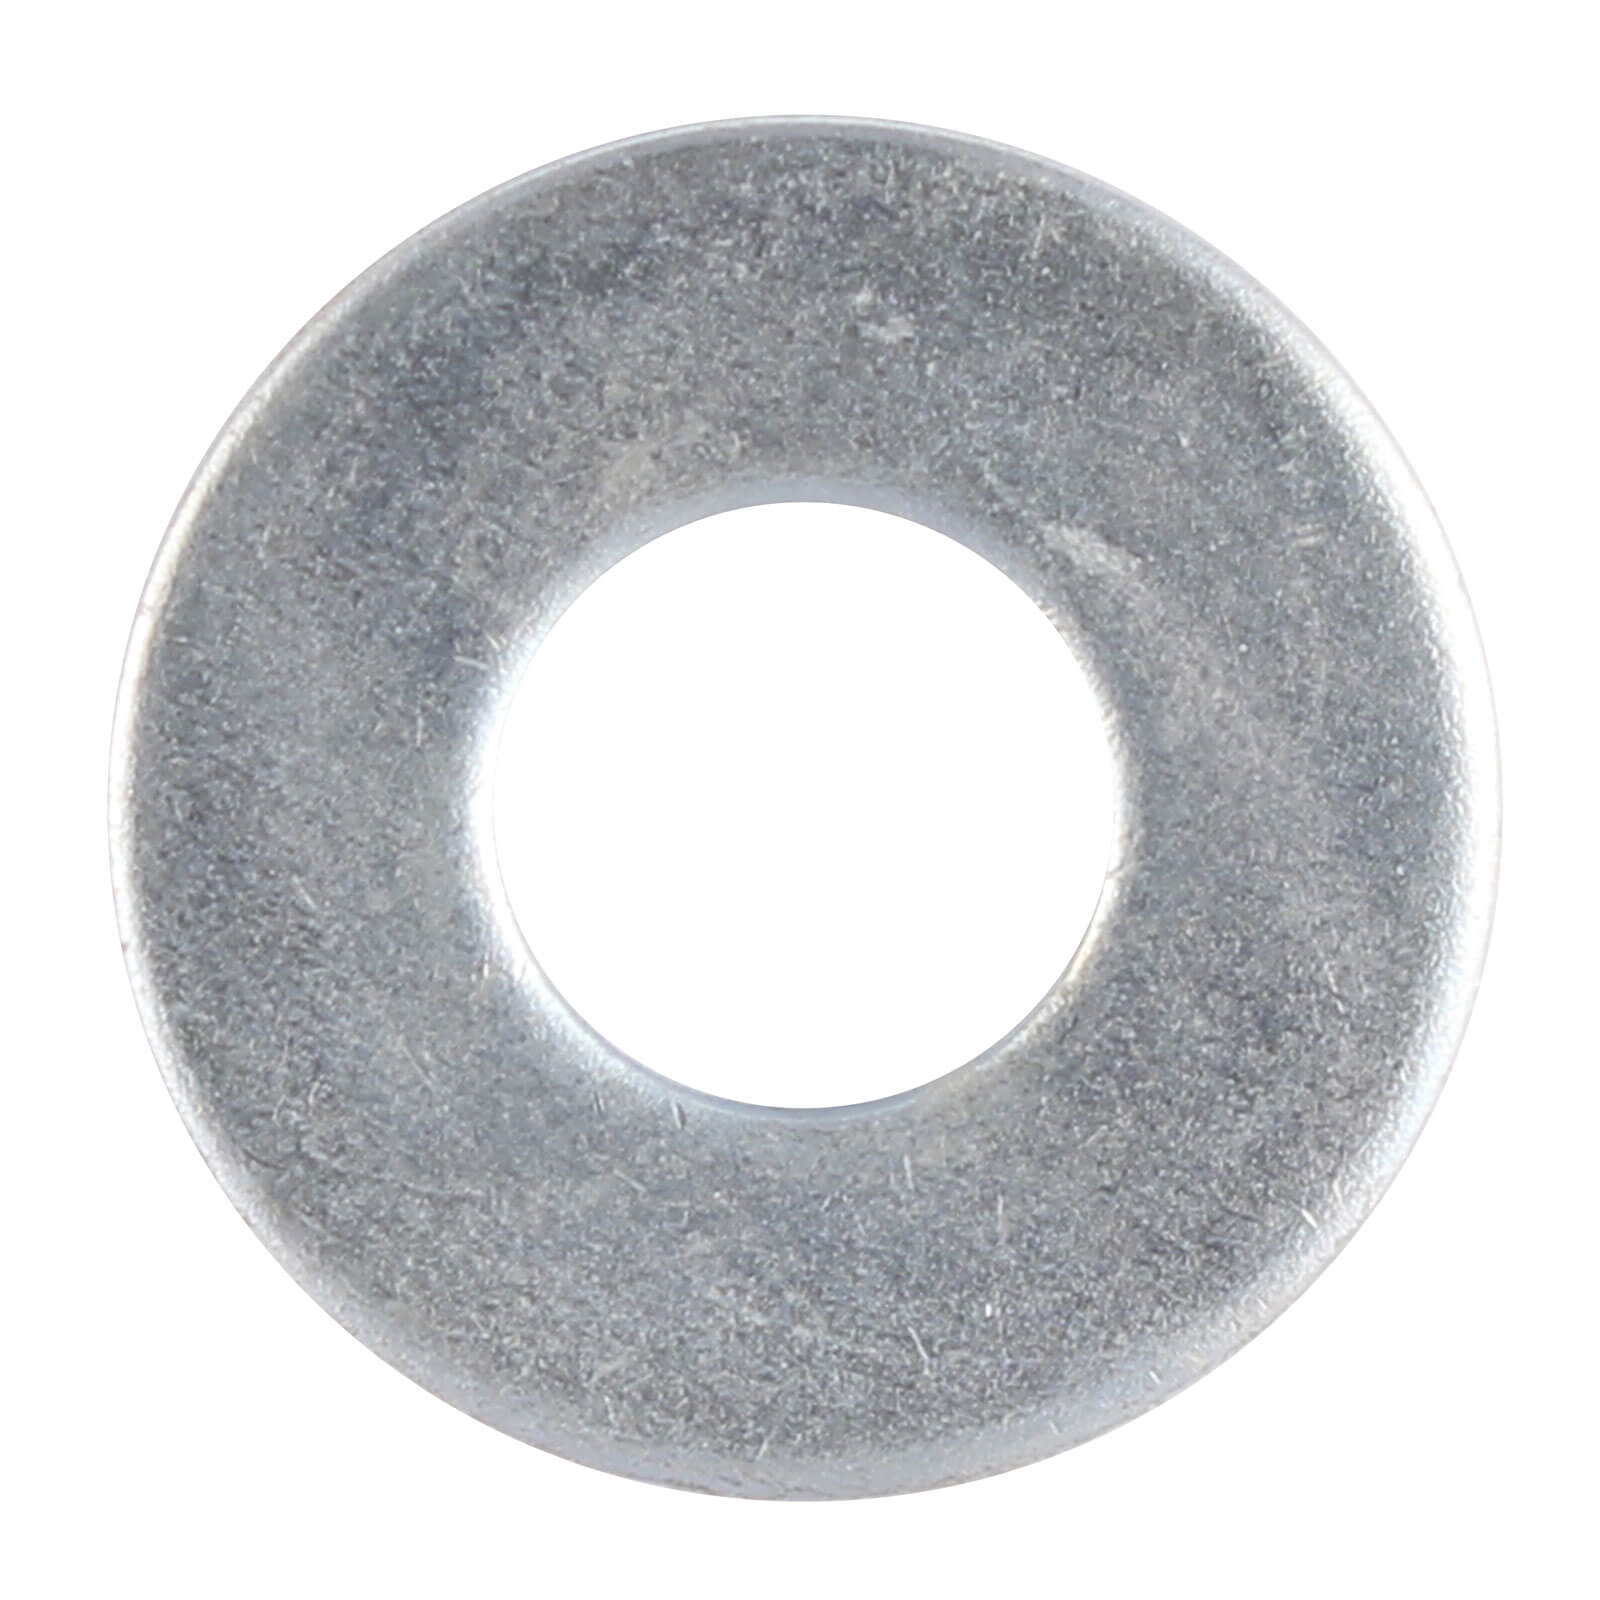 Image of Steel Washers Zinc Plated 20mm 37mm Pack of 4